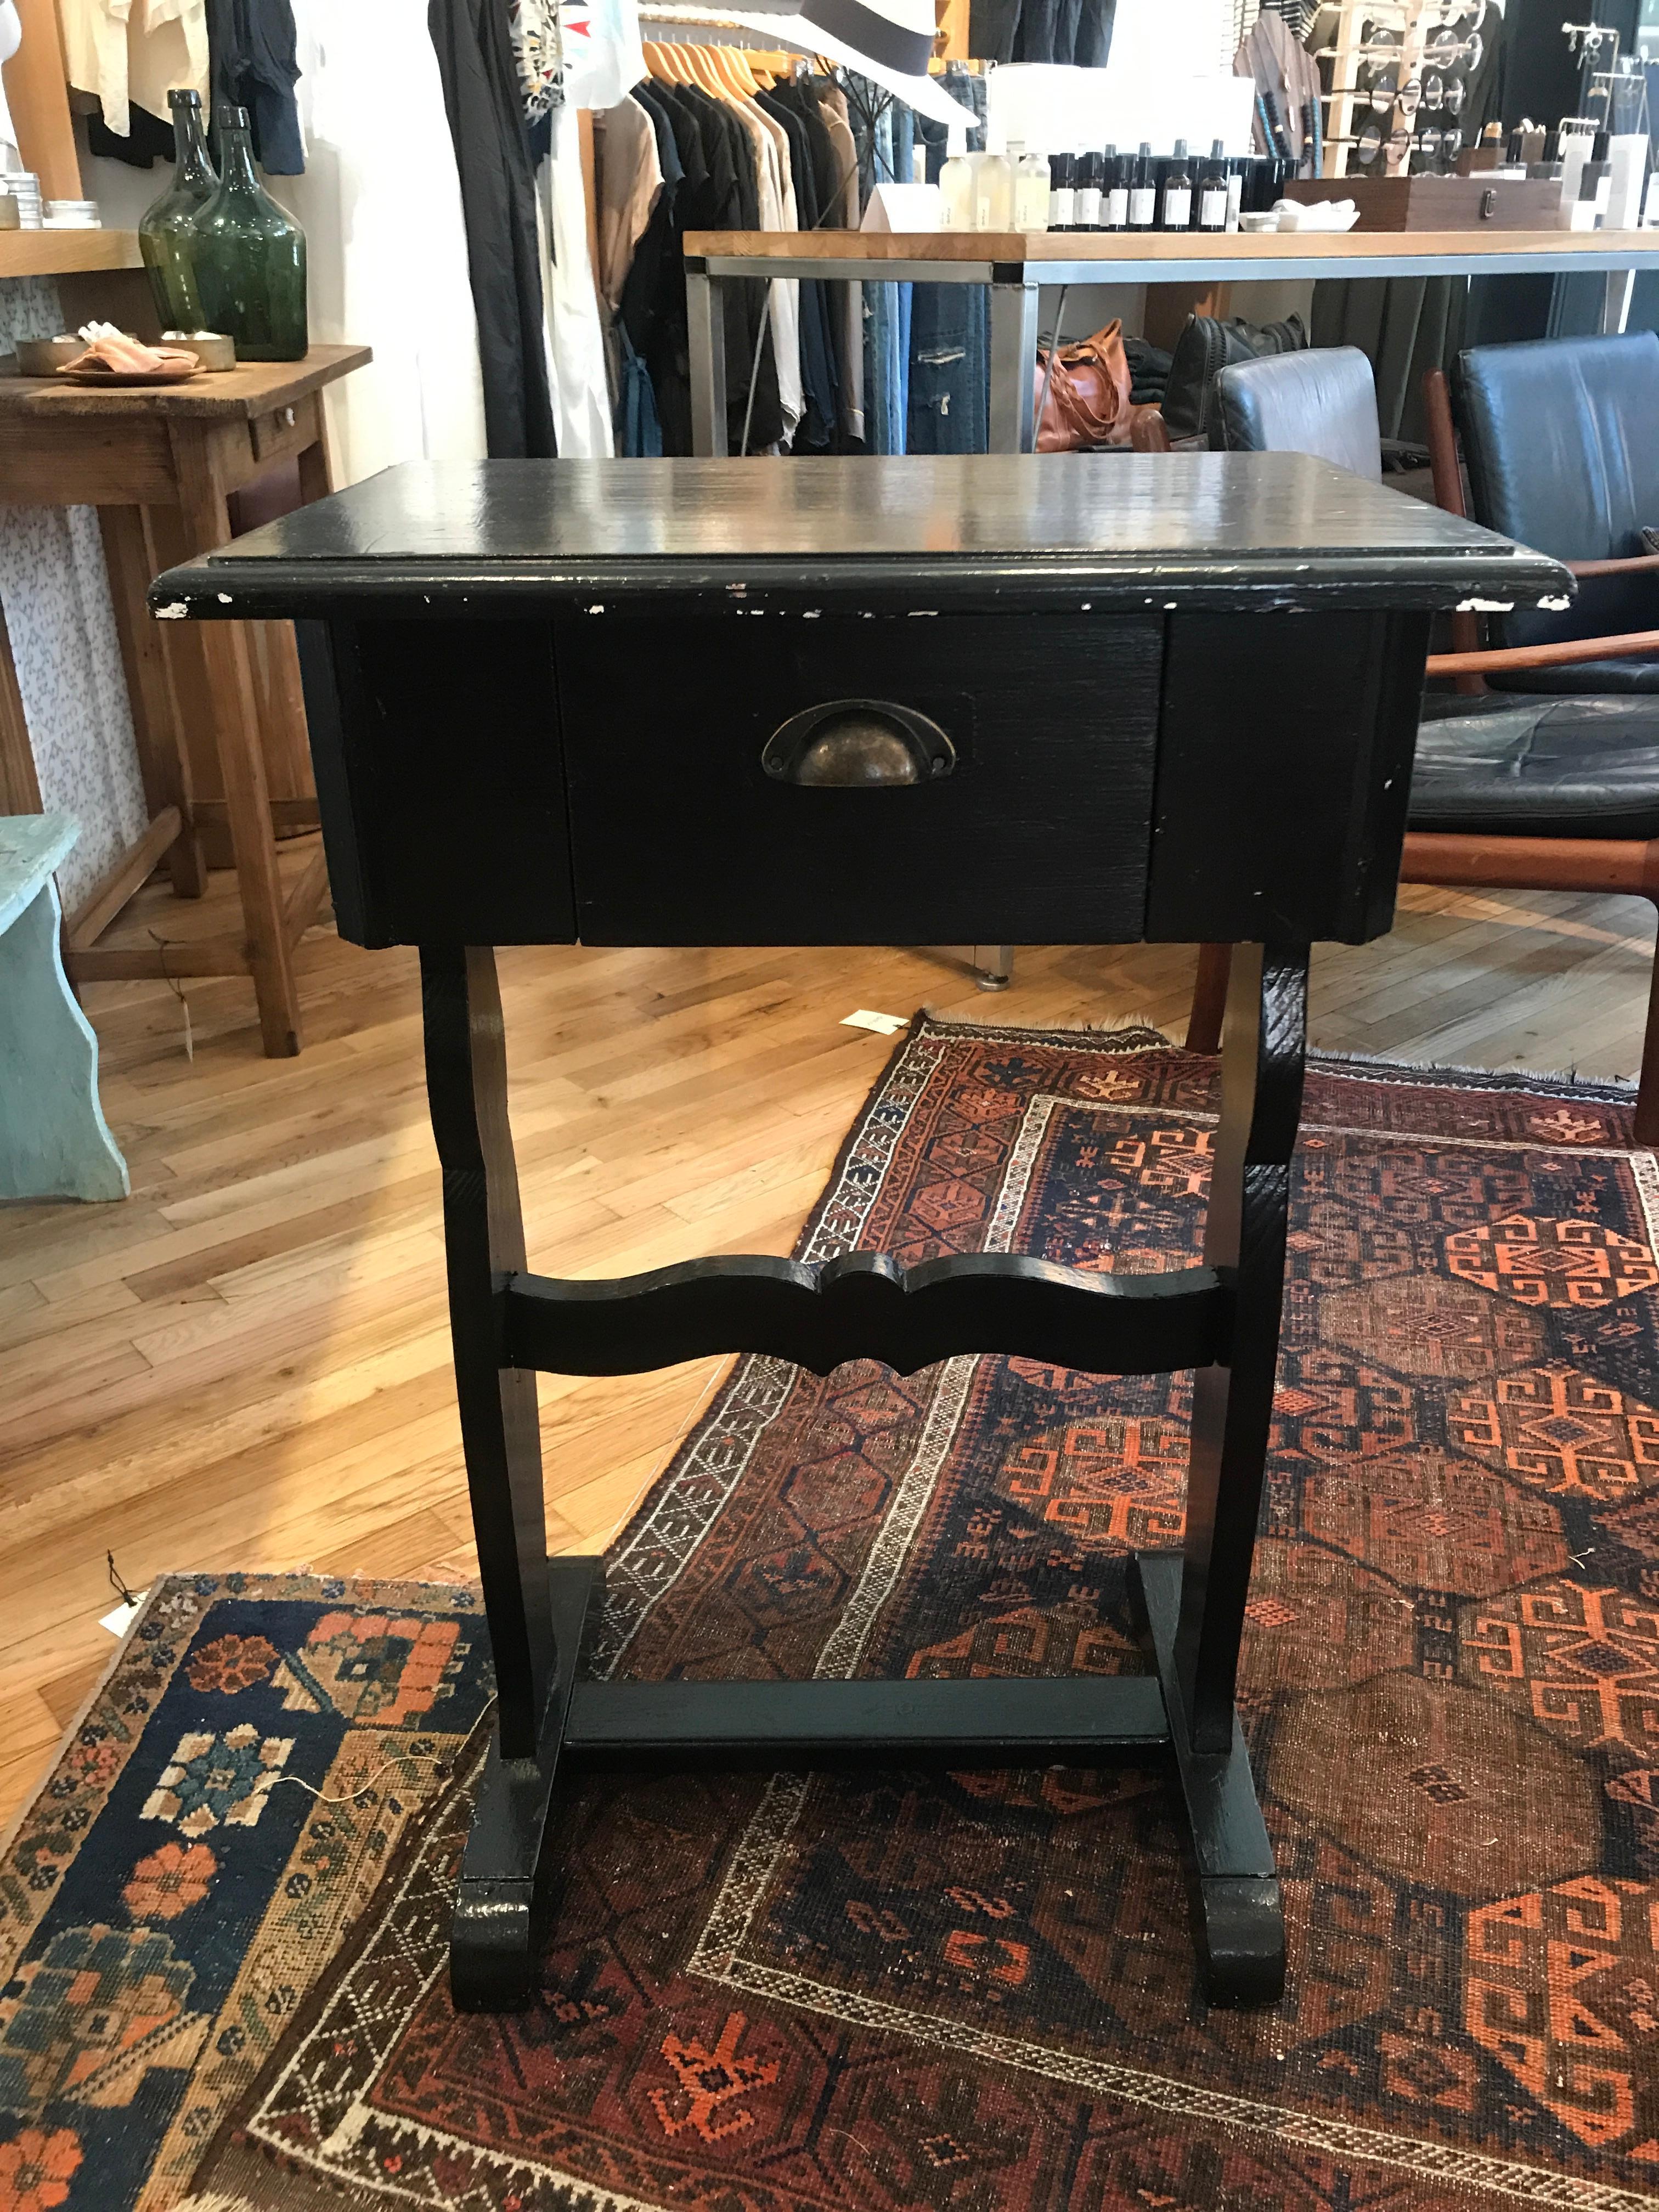 This elegant vintage French end table with a beautifully worn in black finish would be great for a small vanity or entry table. A versatile piece that captures the high style of the French.